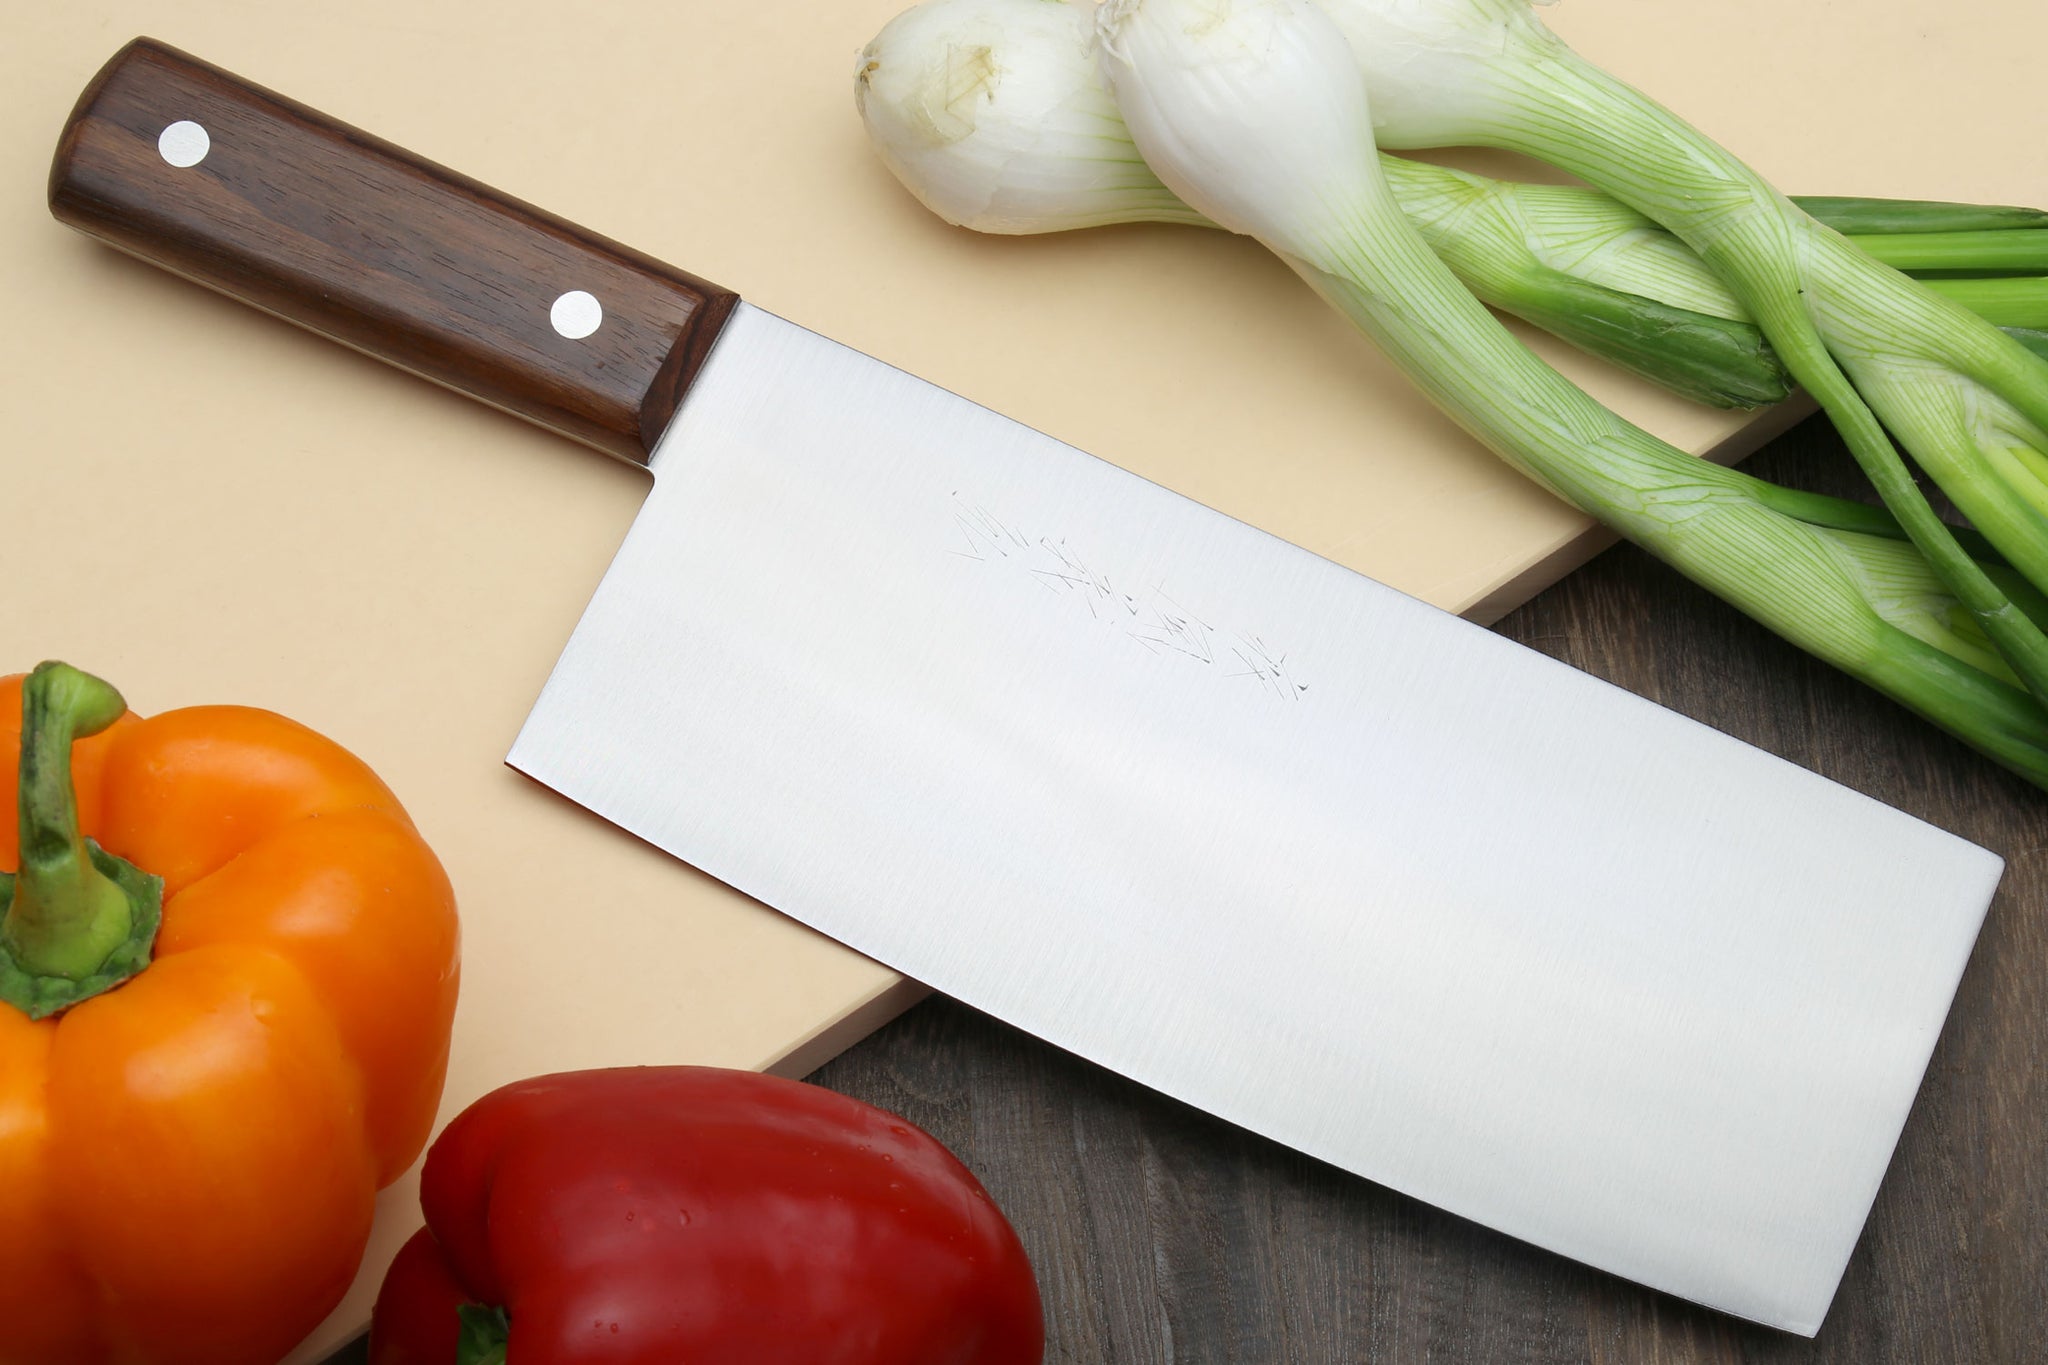  8 Inch Cleaver Knife - Ideal For Meat Cutting And Vegetable  Chopping - Perfect Chinese Clever Kitchen Knife For Home & Professional  Chefs - Durable And Multi-purpose Cleavers - Butcher Cleaver